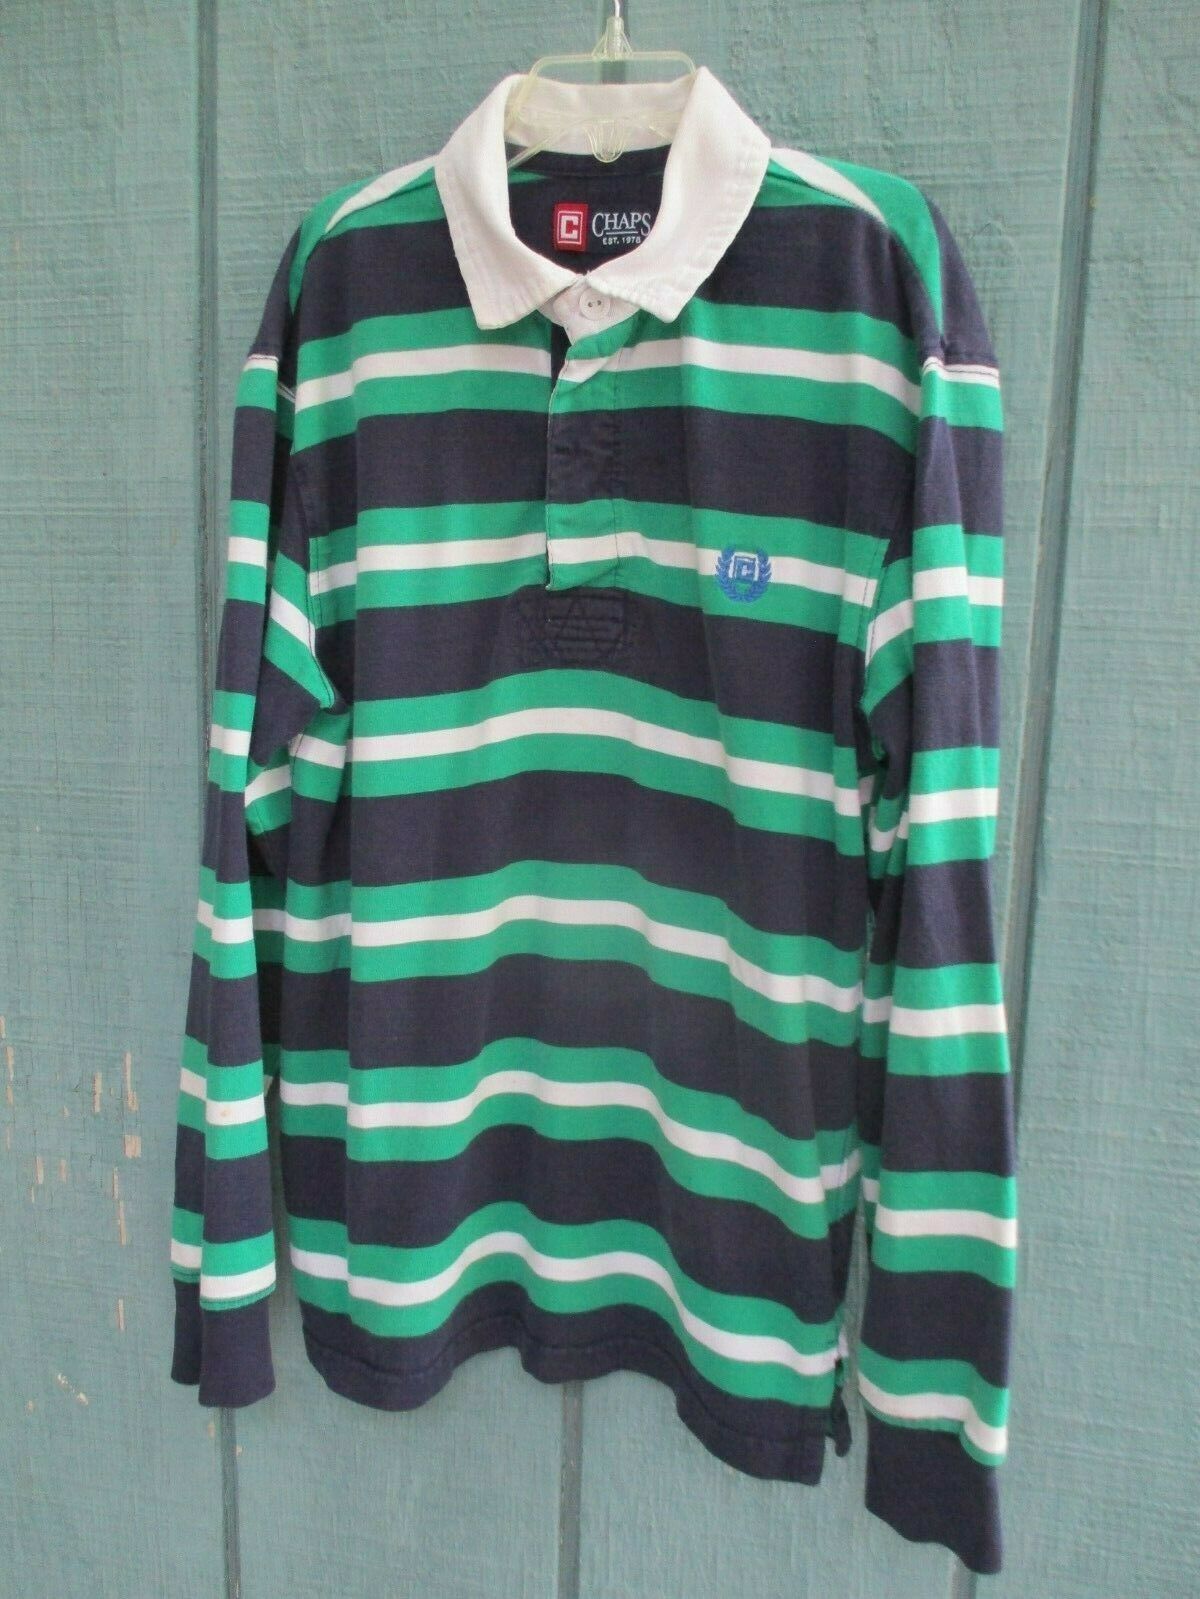 Chaps Boy's Size M (10-12) 100% Cotton Long Sleeve Striped Green Rugby ...